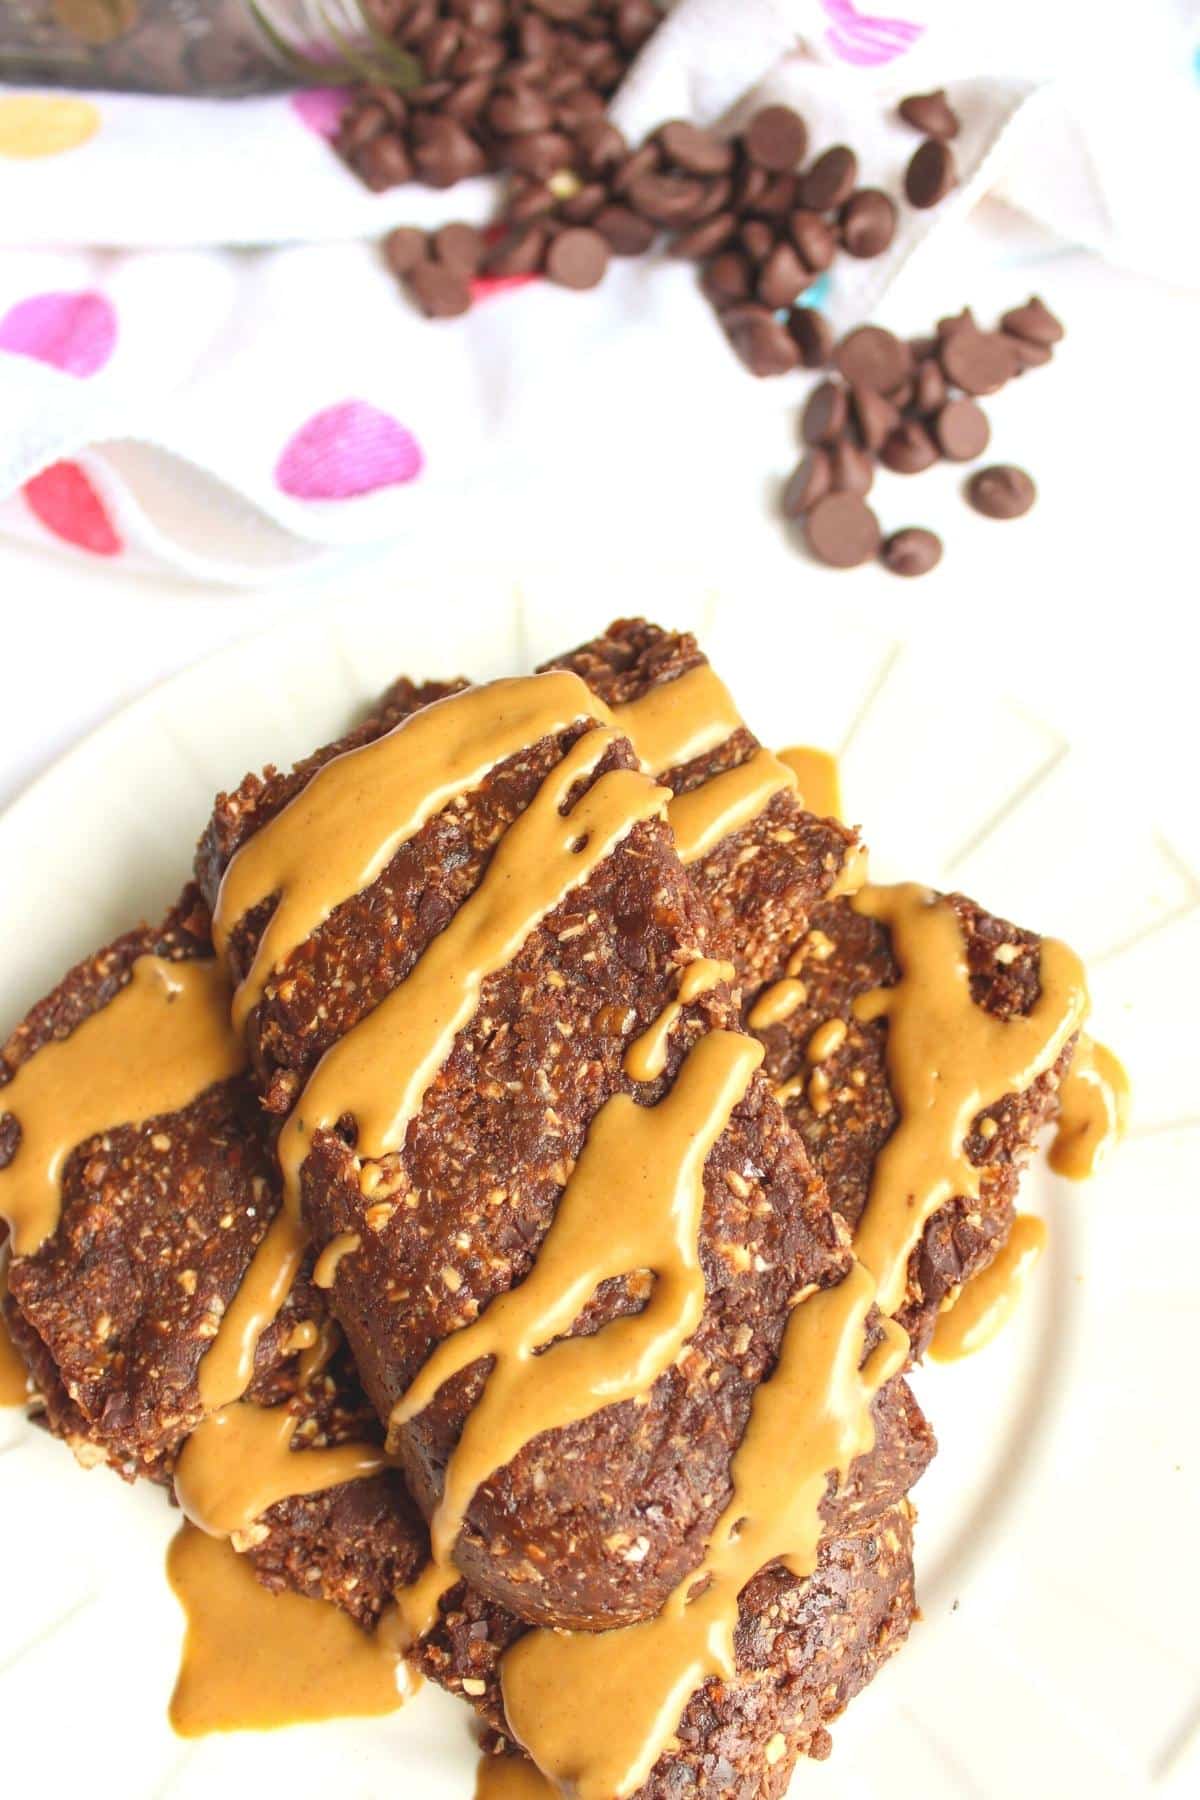 Date balls drizzled with peanut butter drizzle